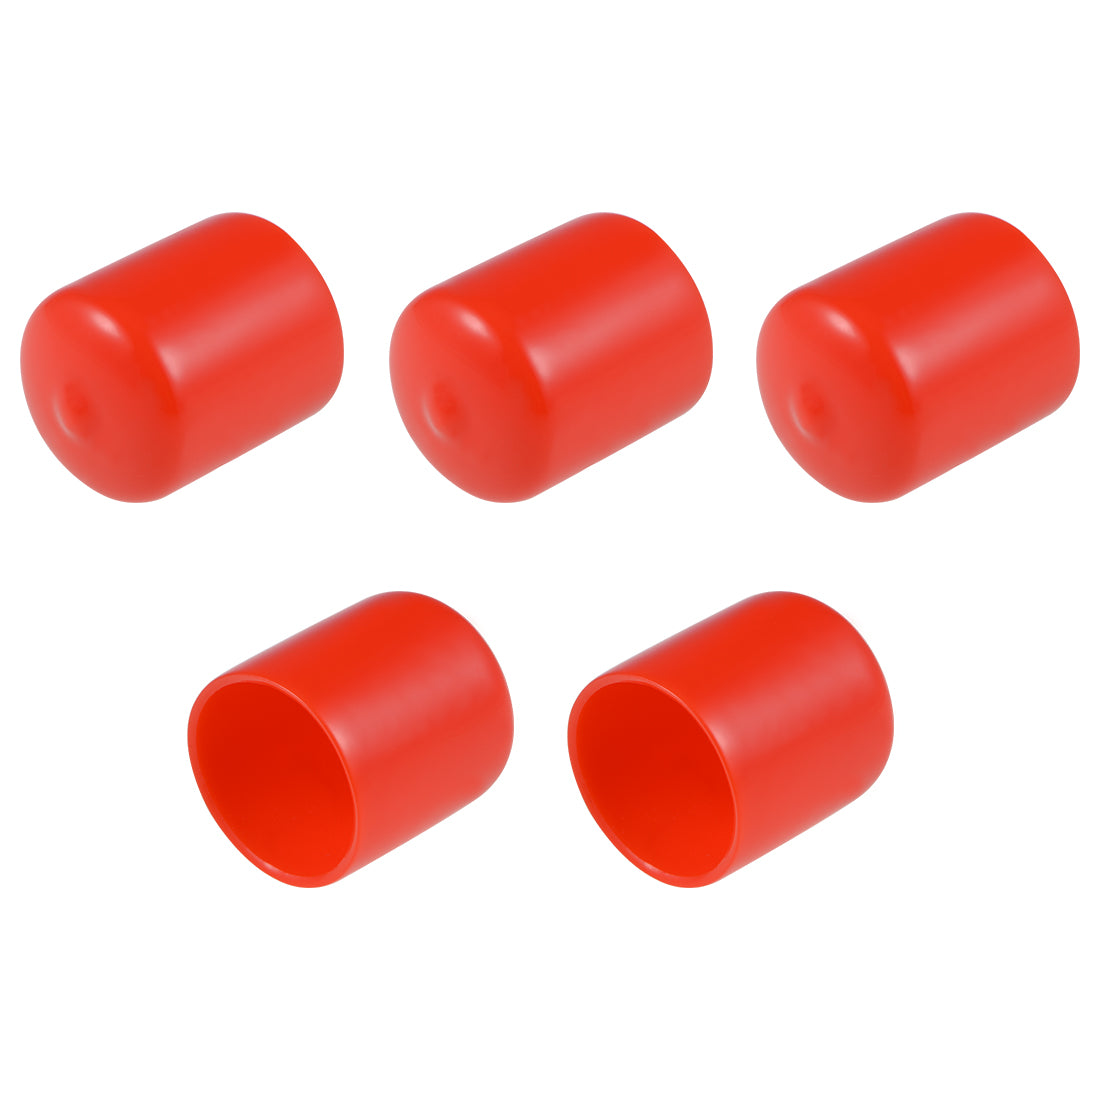 uxcell Uxcell Screw Thread Protector, 28mm ID Round End Cap Cover Red Tube Caps 5pcs